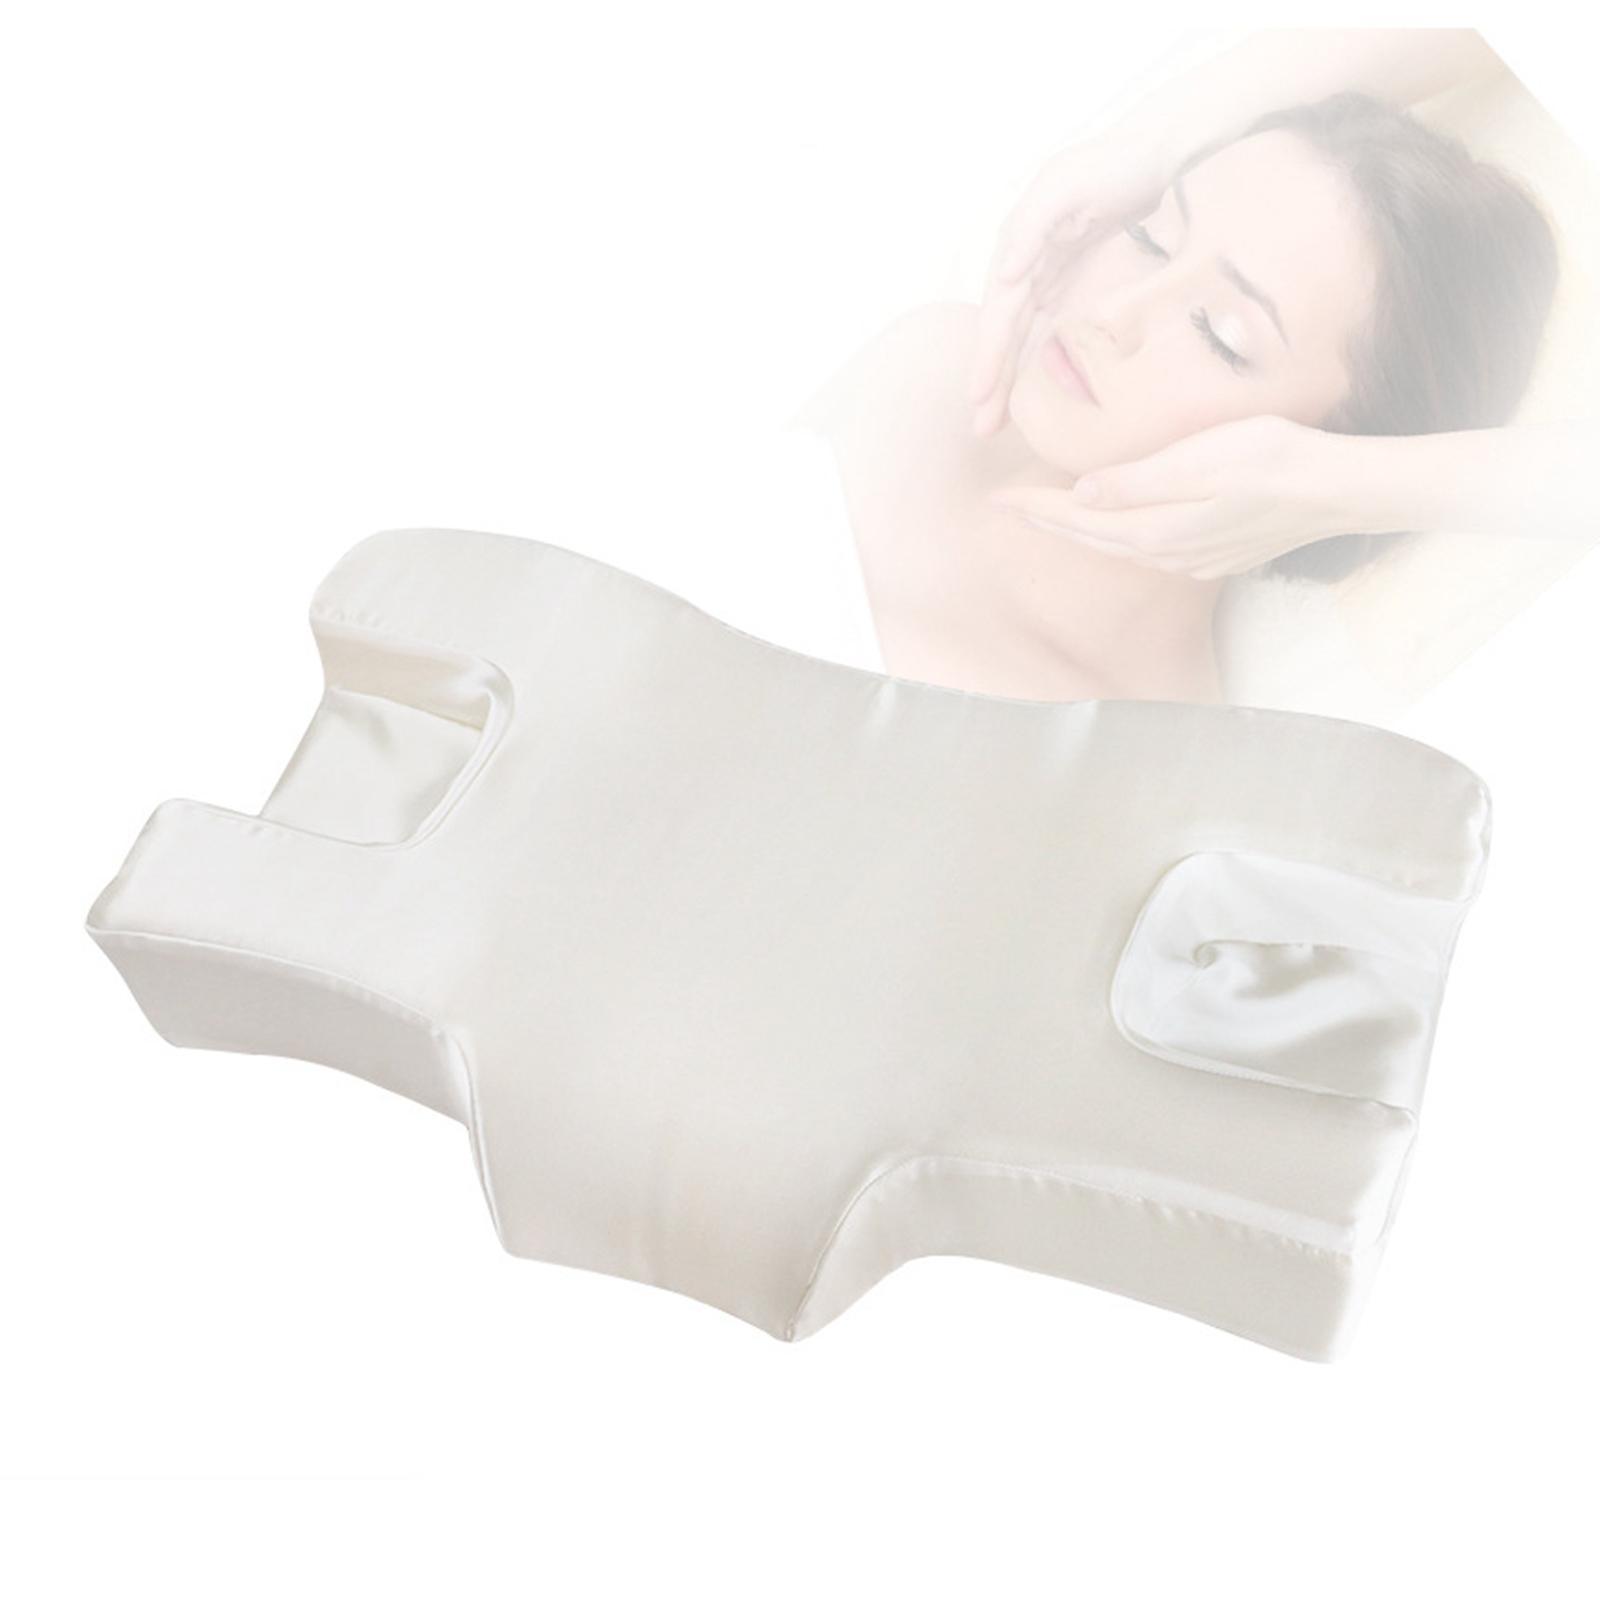 Bedding Pillow Beauty Sleep Pillow Face Cervical Pillow for Mom Adults Gifts